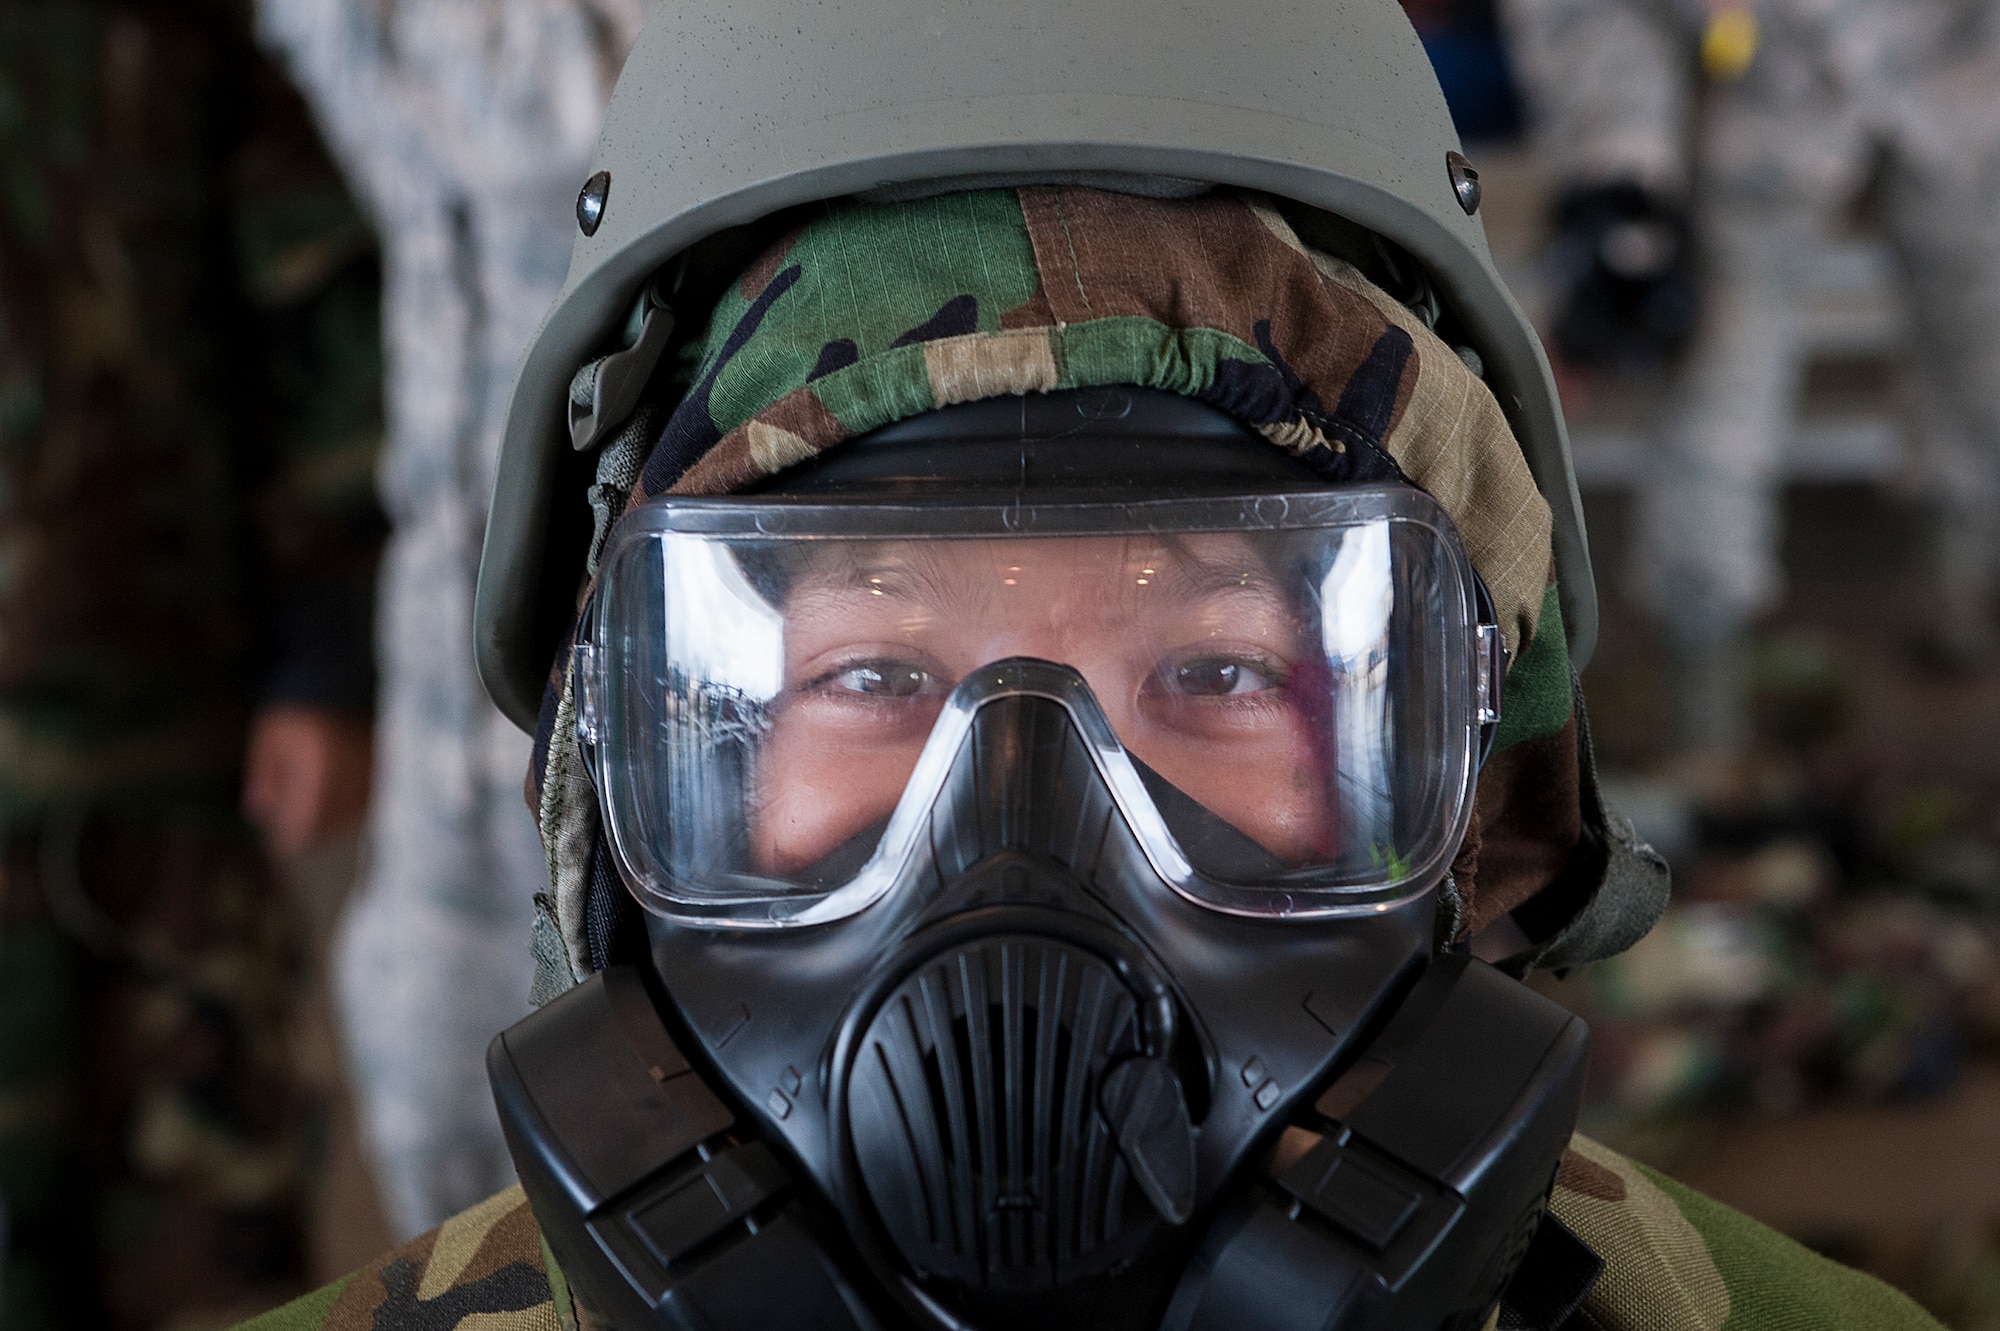 A child tries on a gas mask and mission oriented protective posture (MOPP) gear at Skoshi Warrior Nov. 14, 2015, at Kadena Air Base, Japan. Skoshi Warrior is an annual event designed to help children understand some of the deplyment processes that their military parents go through. (U.S. Air Force photo by Airman 1st Class Corey M. Pettis)